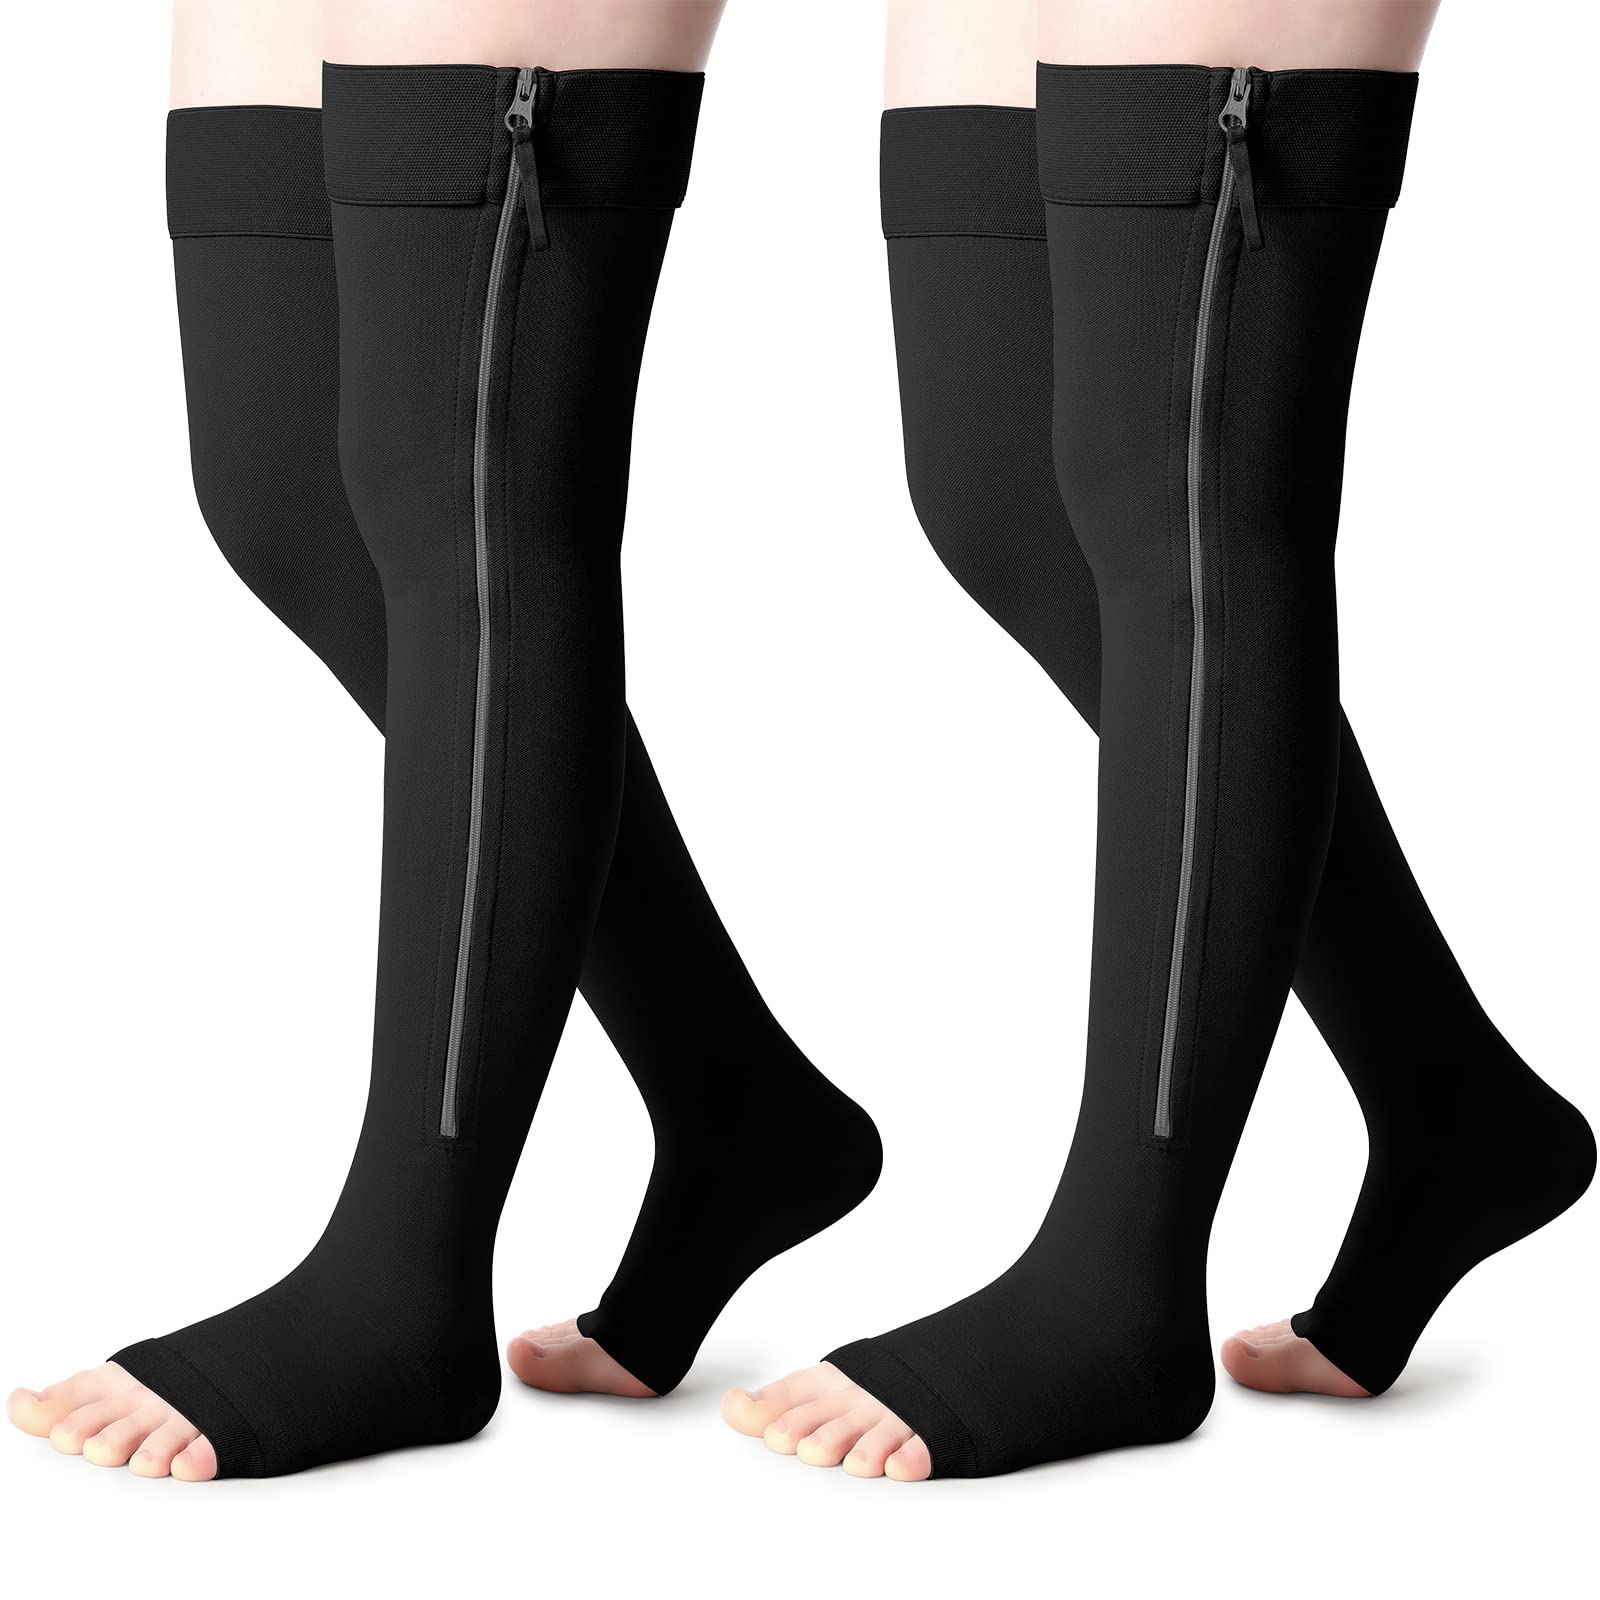 Pairs Zipper Compression Socks Open Toe Work Out Fitness